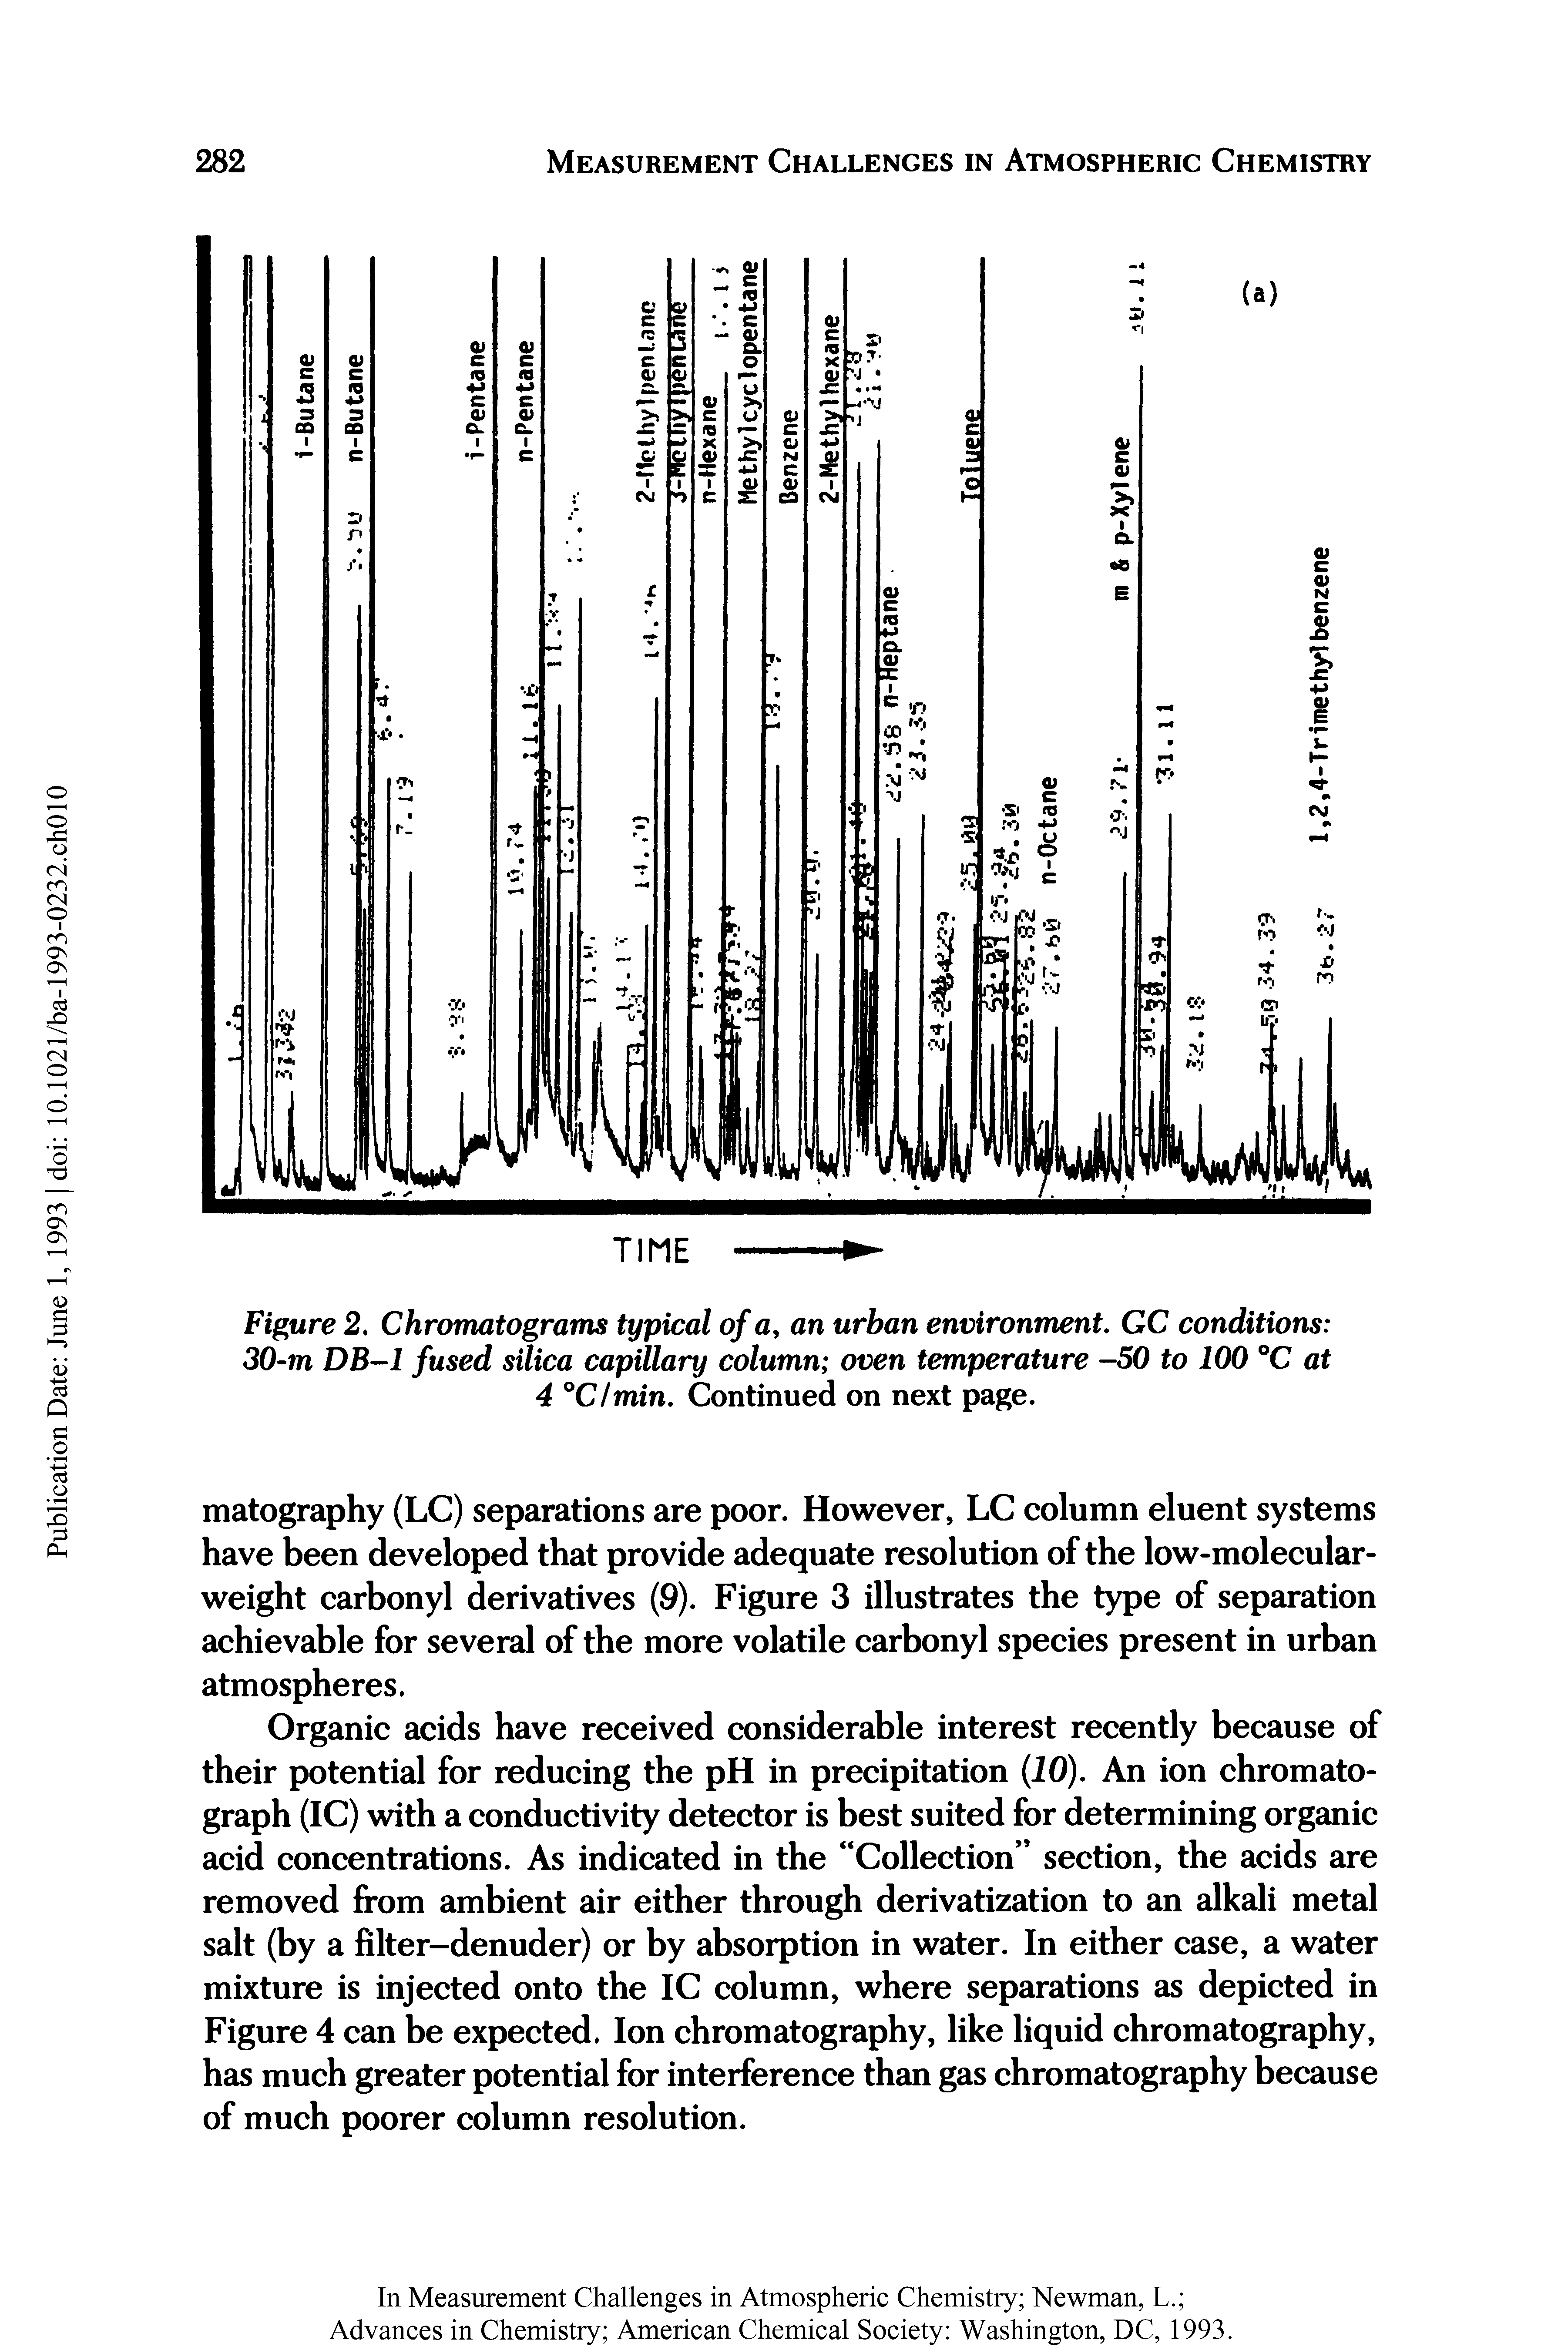 Figure 2. Chromatograms typical of a, an urban environment. GC conditions 30-m DB-1 fused silica capillary column oven temperature -50 to 100 °C at 4 °C/min. Continued on next page.